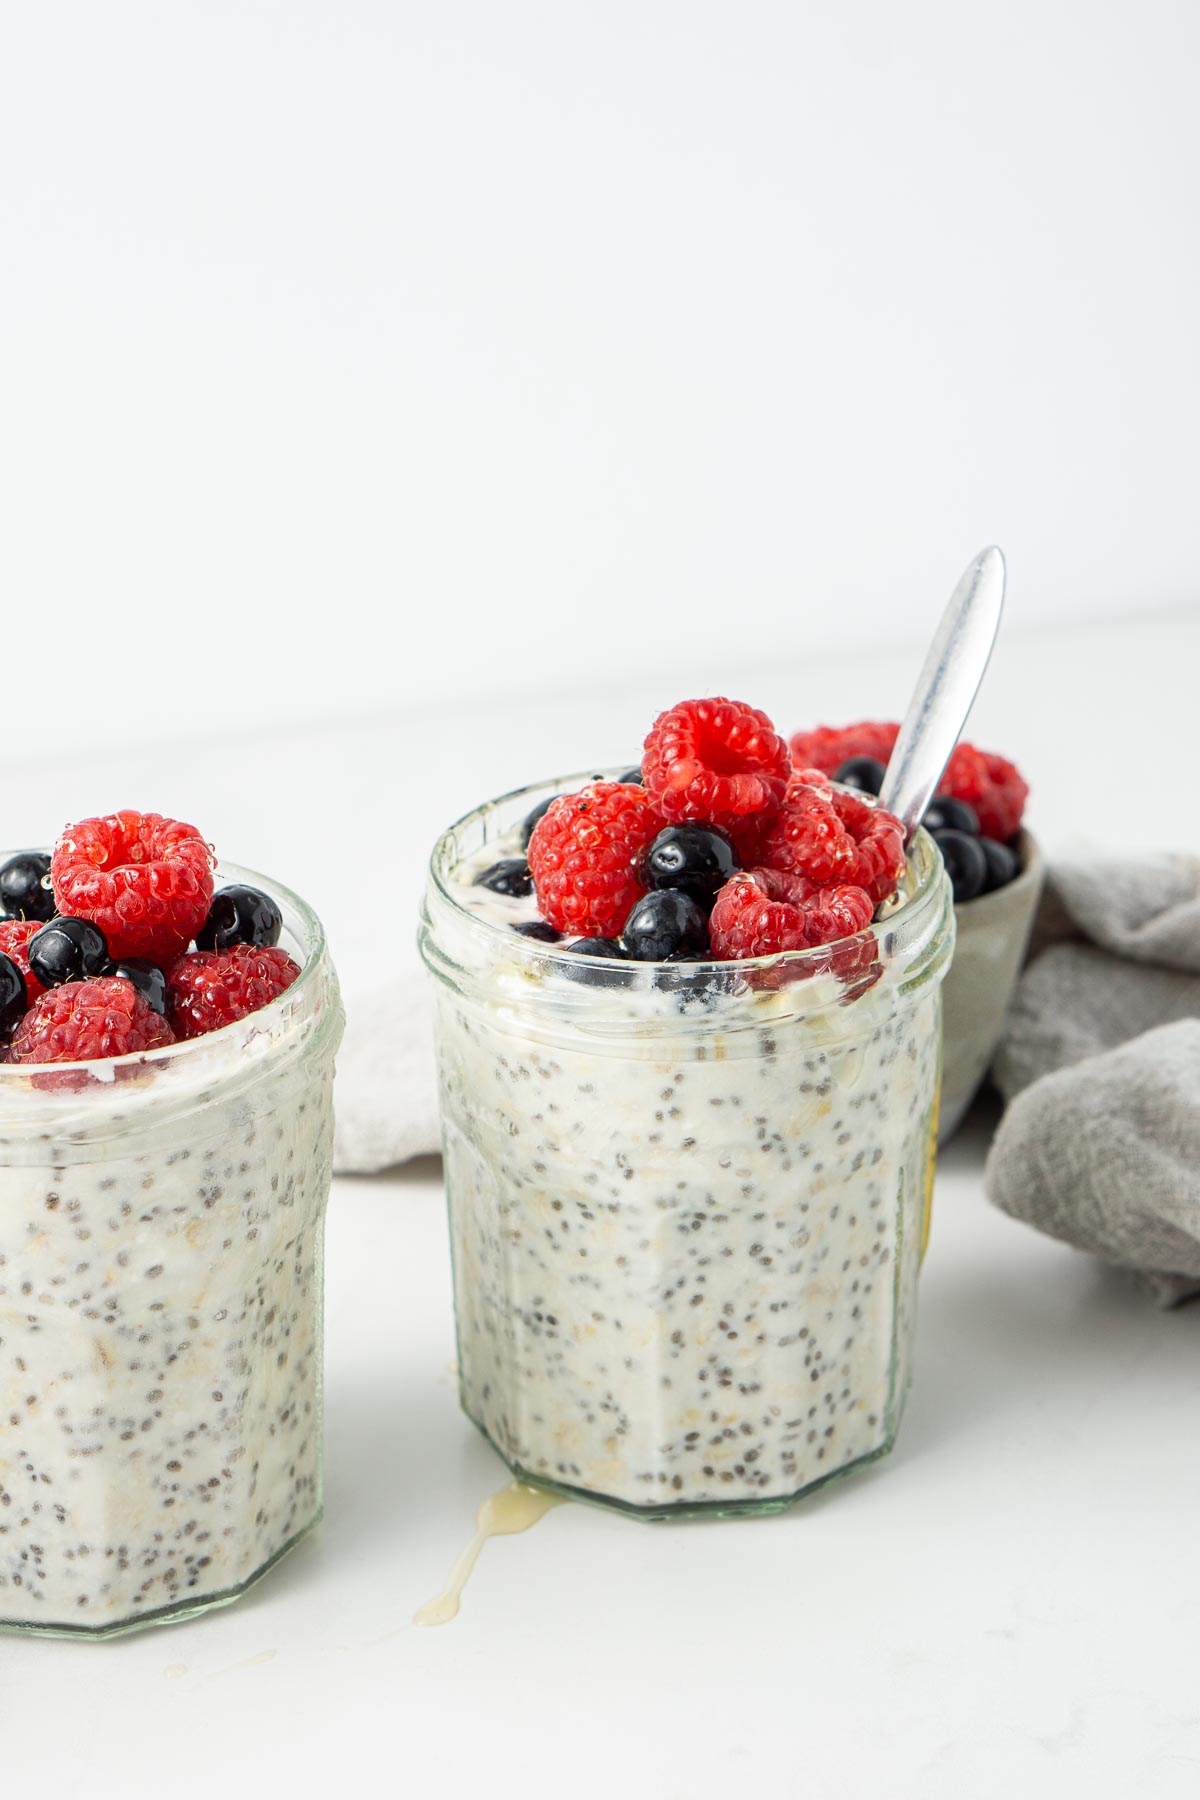 Overnight oats in jars topped with fresh berries and honey with a spoon.